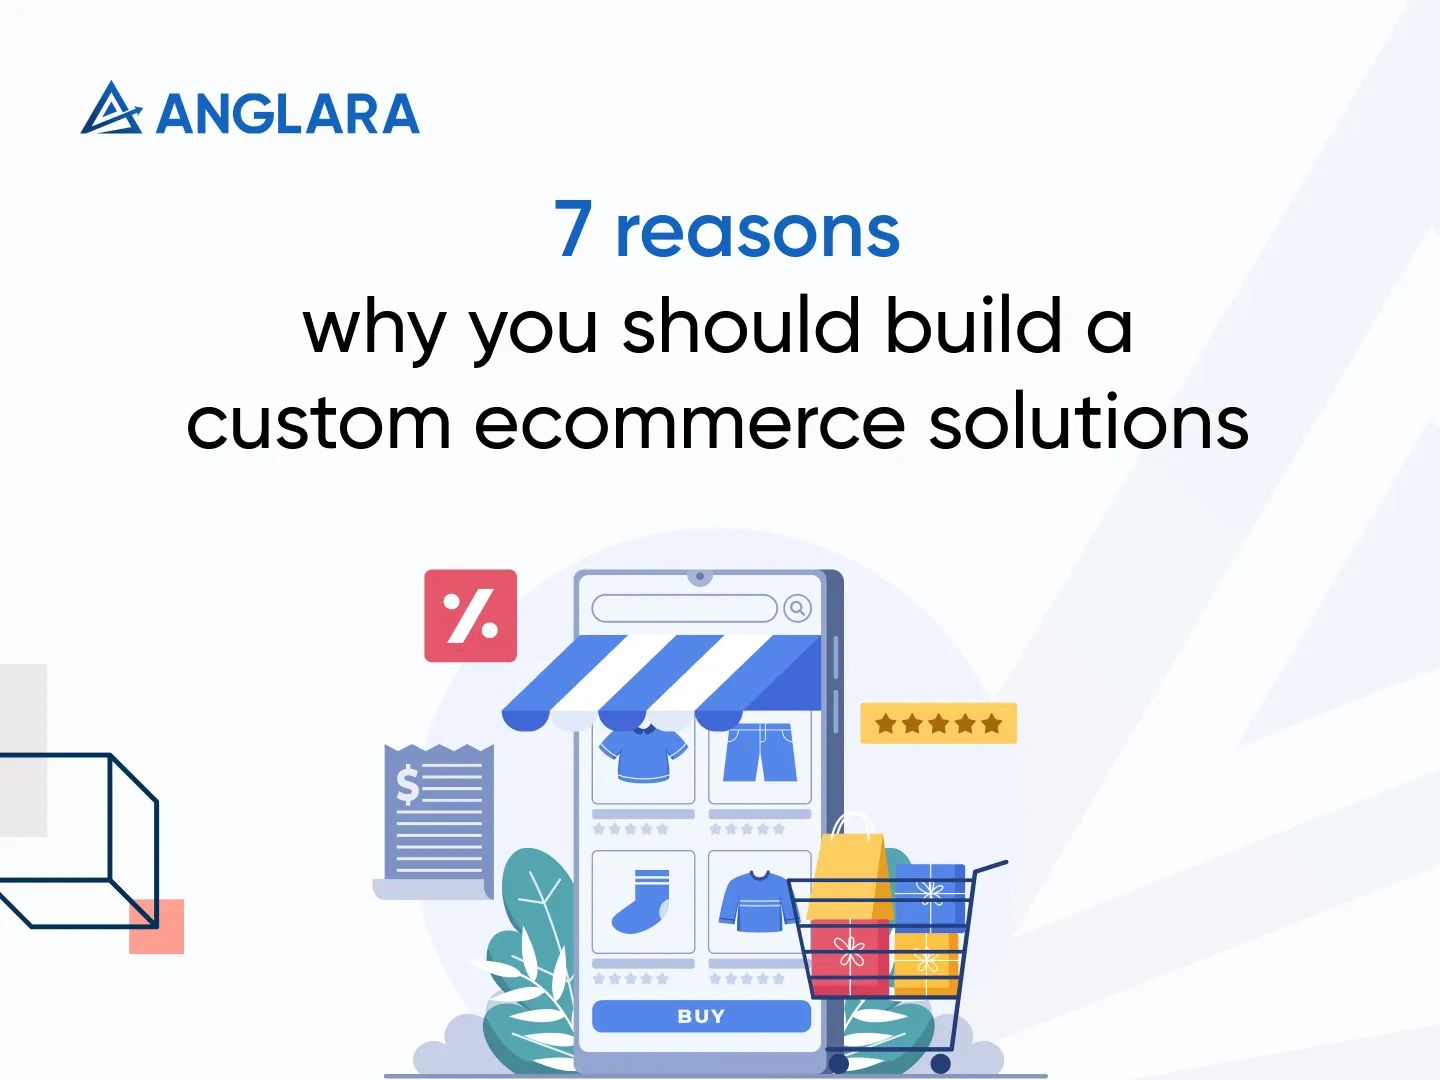 Why you should build a custom e-commerce solution?